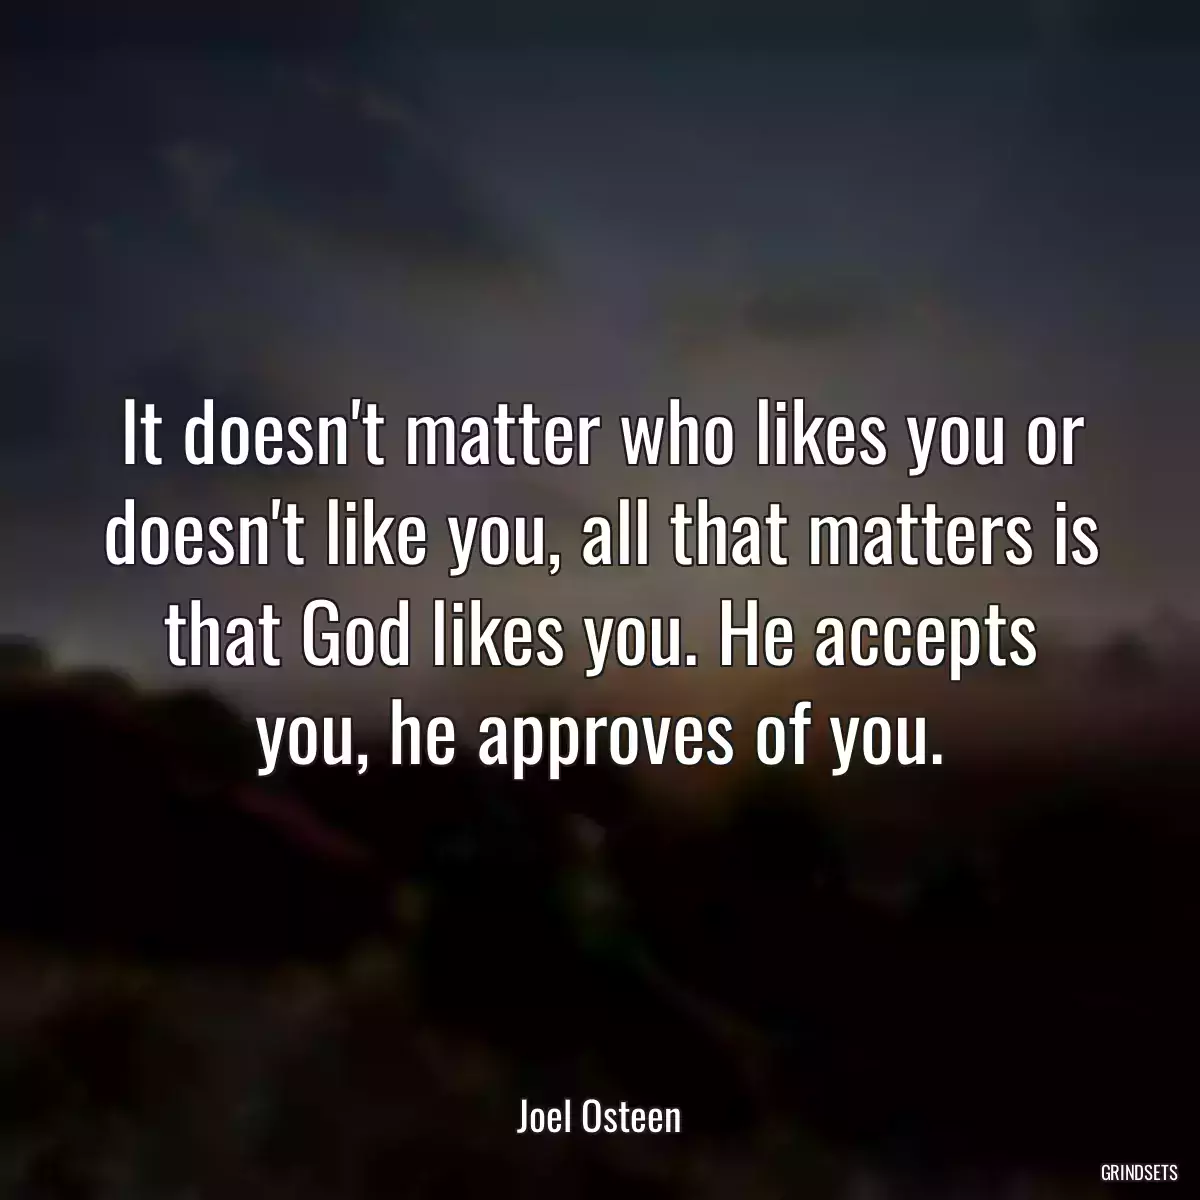 It doesn\'t matter who likes you or doesn\'t like you, all that matters is that God likes you. He accepts you, he approves of you.